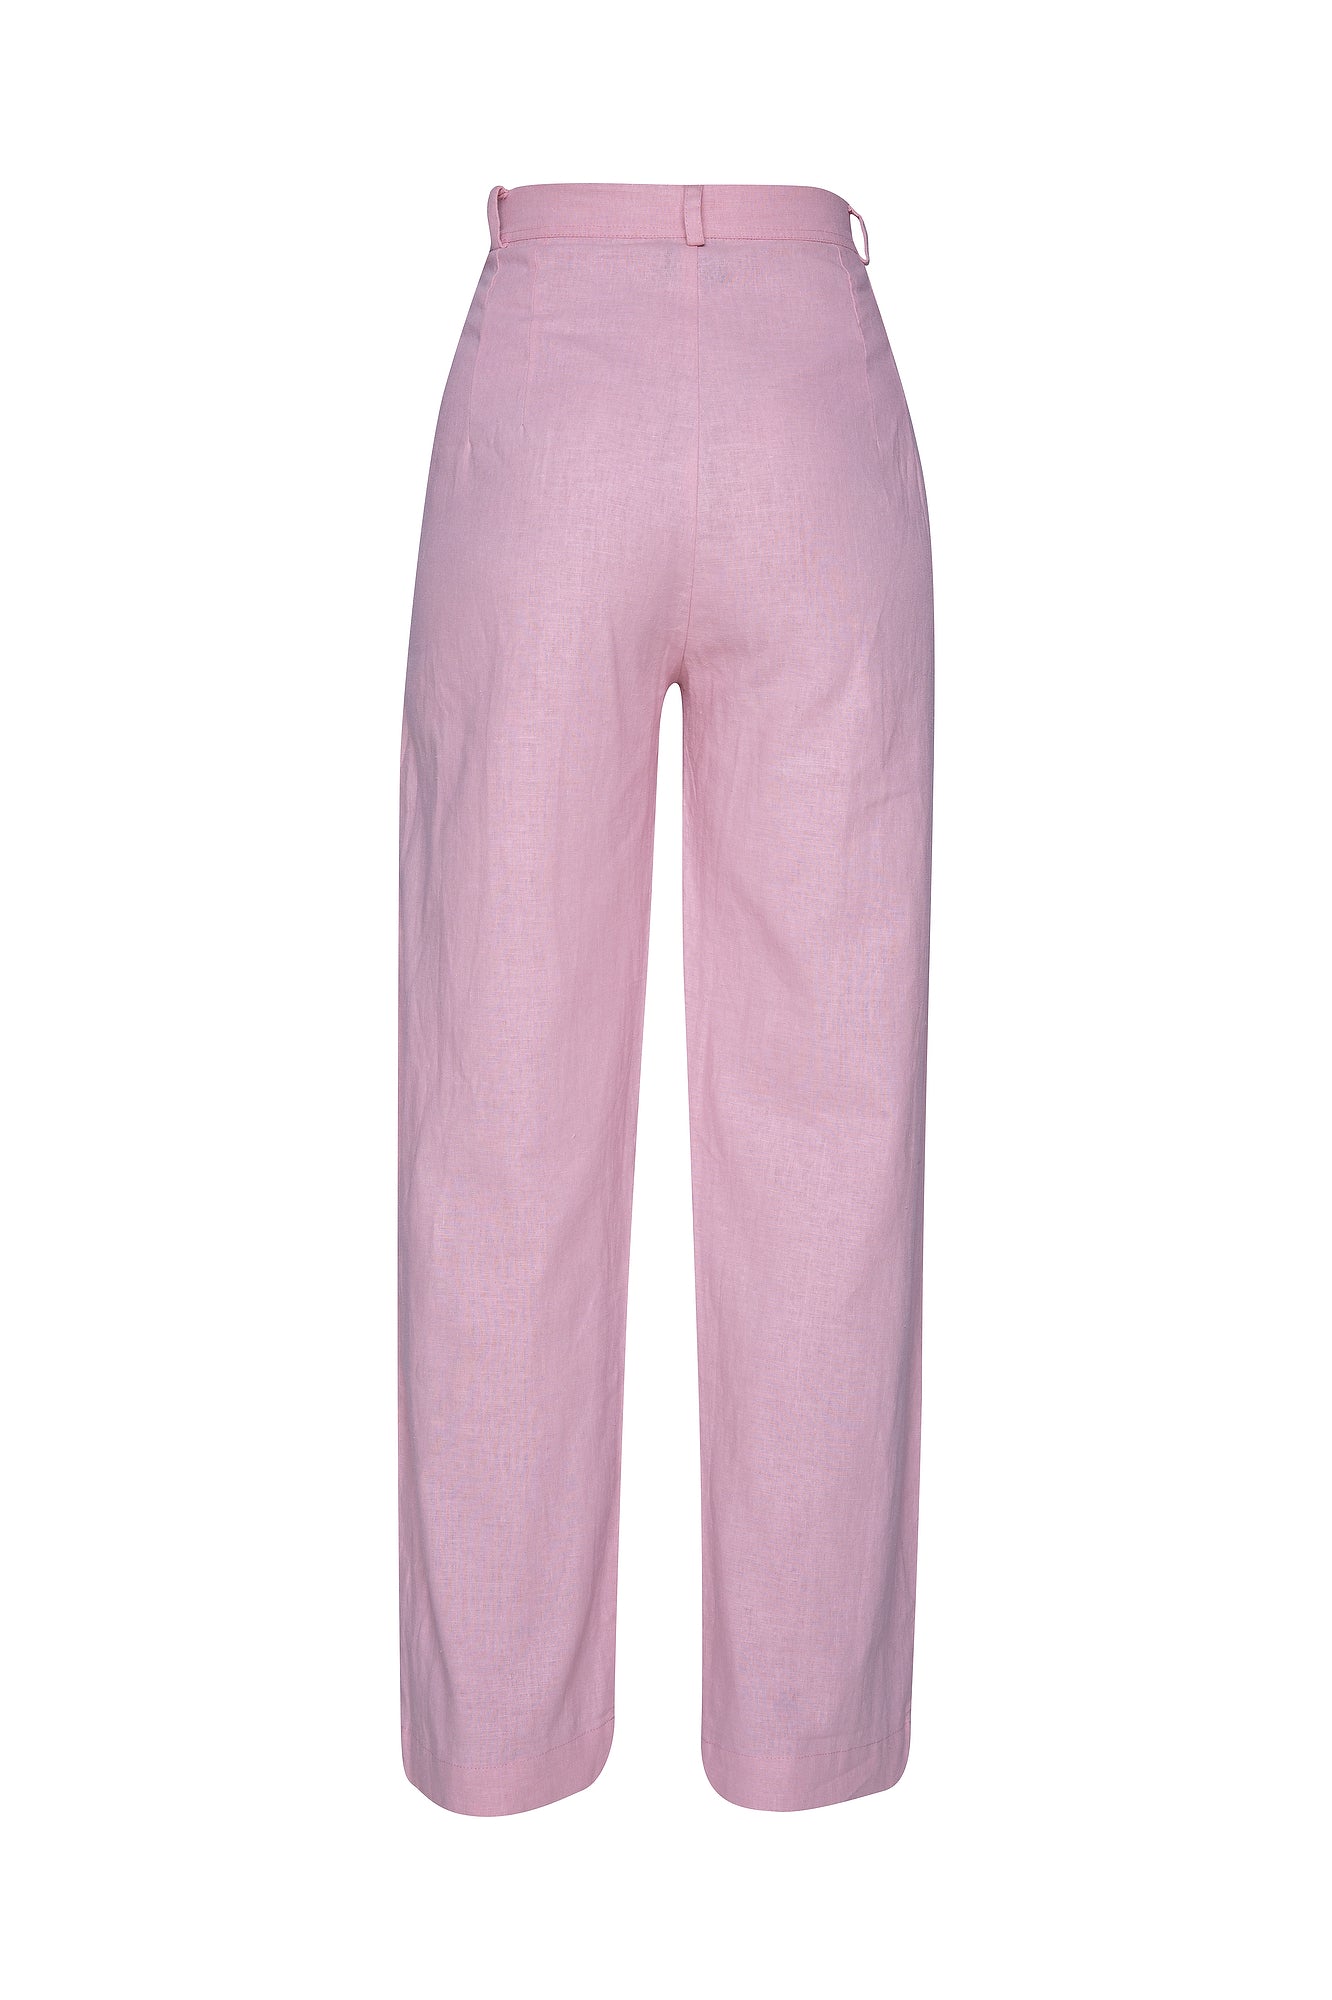 THE GRANDAD LINEN PANTS - DUSTY PINK – State of Georgia